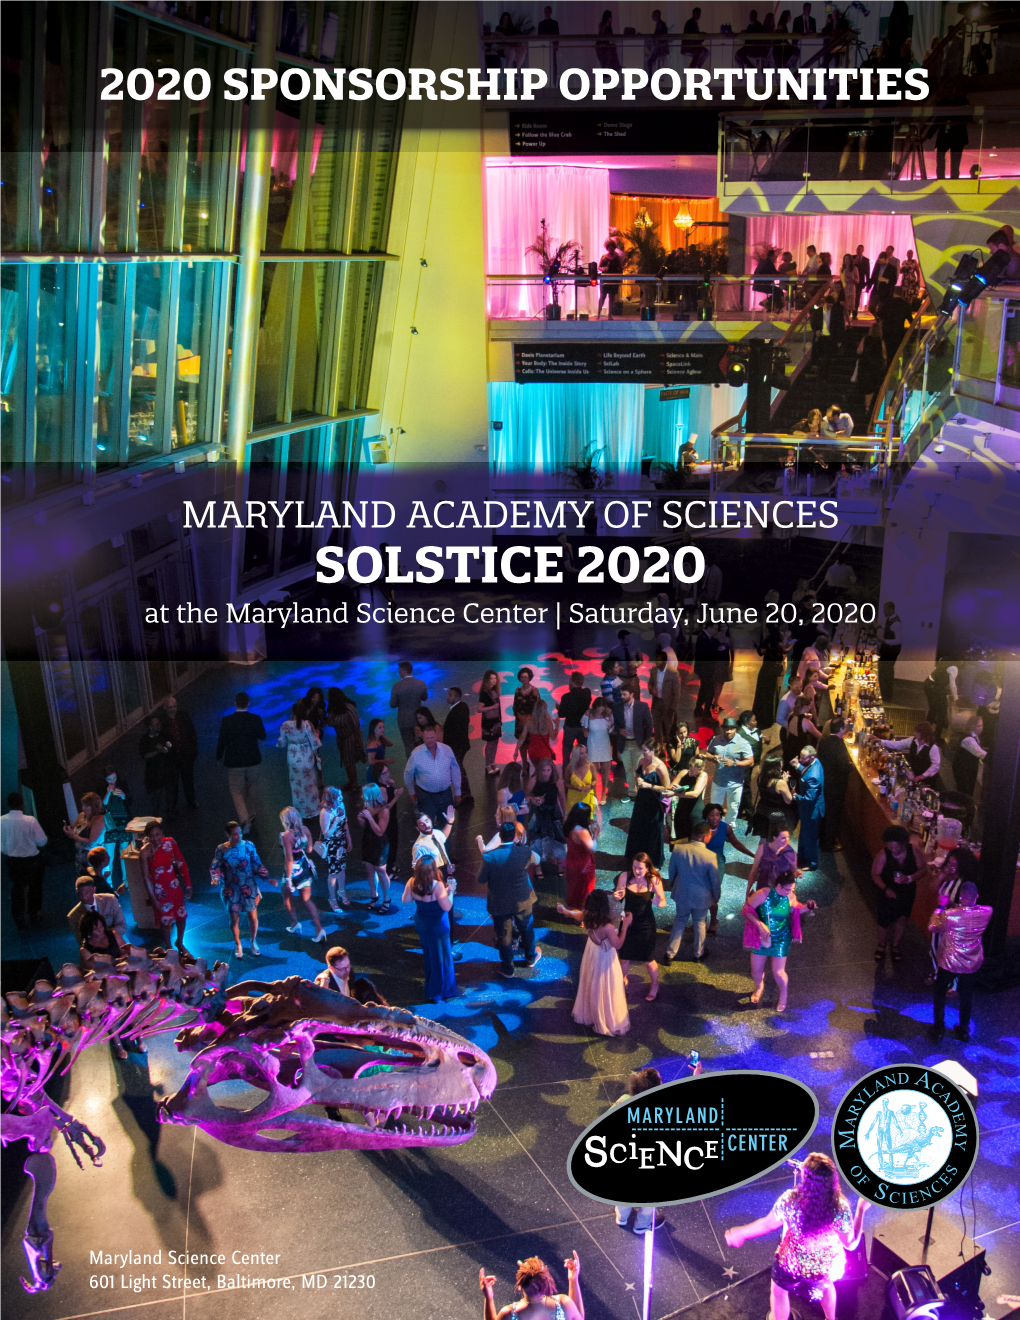 SOLSTICE 2020 at the Maryland Science Center | Saturday, June 20, 2020